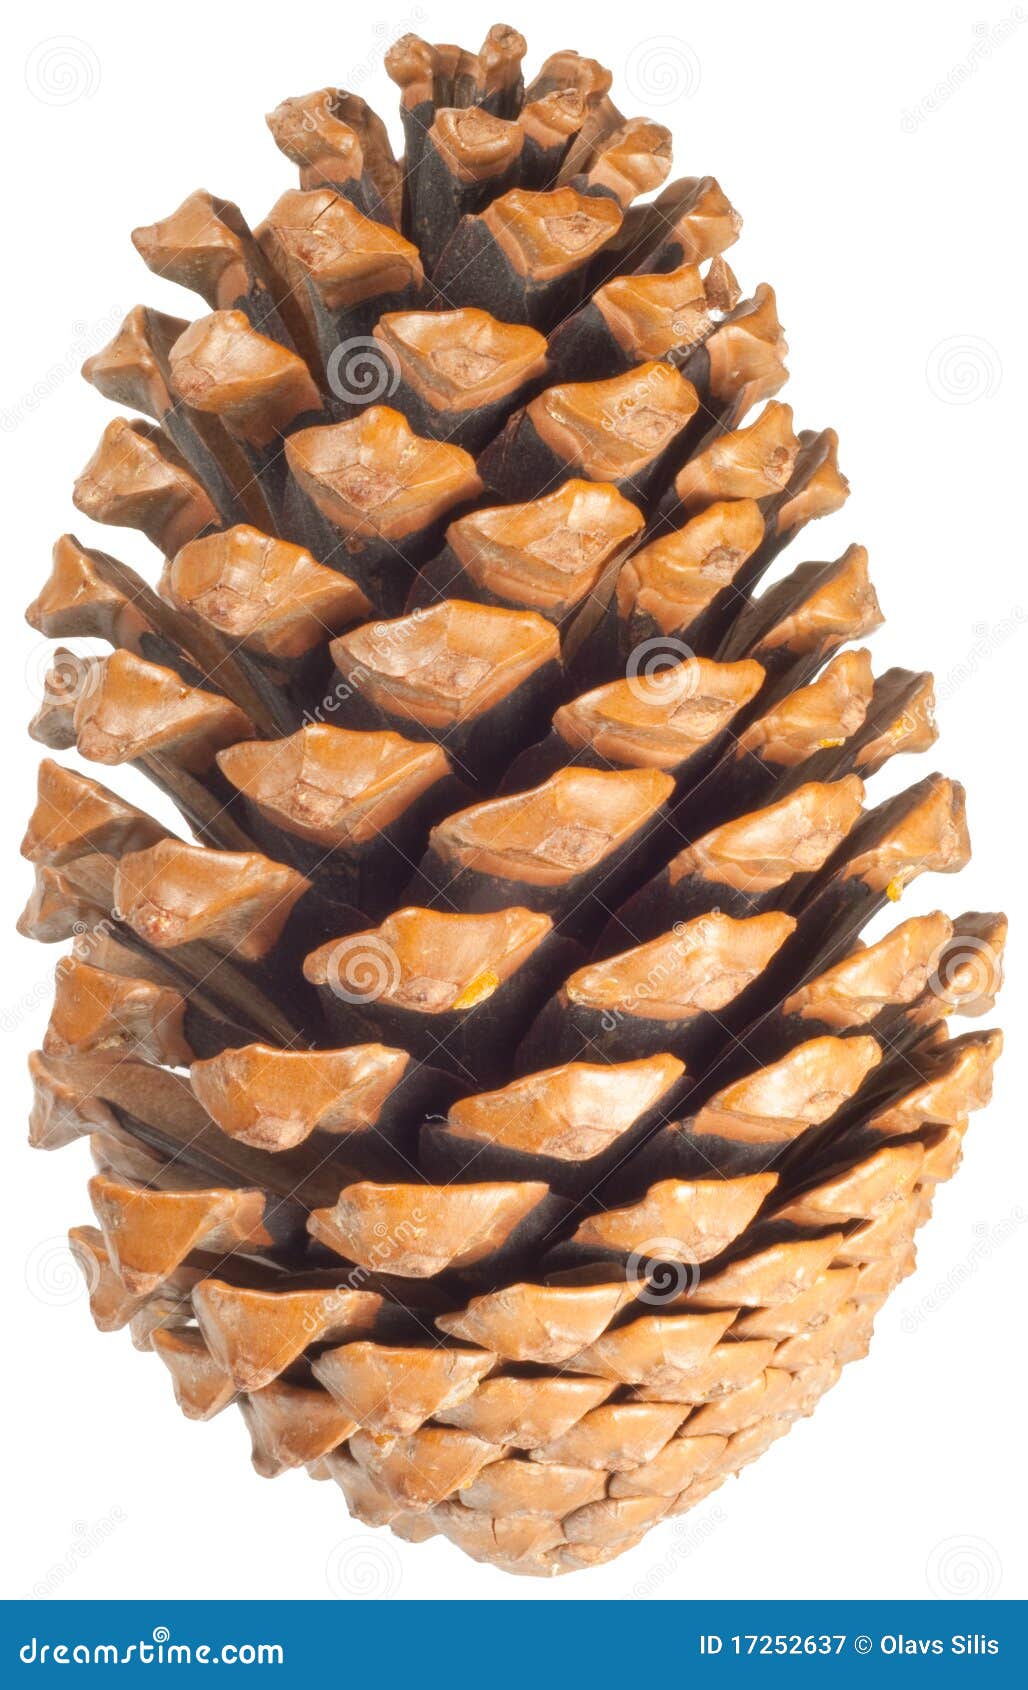 Pinecone Royalty Free Stock Photography - Image: 17252637